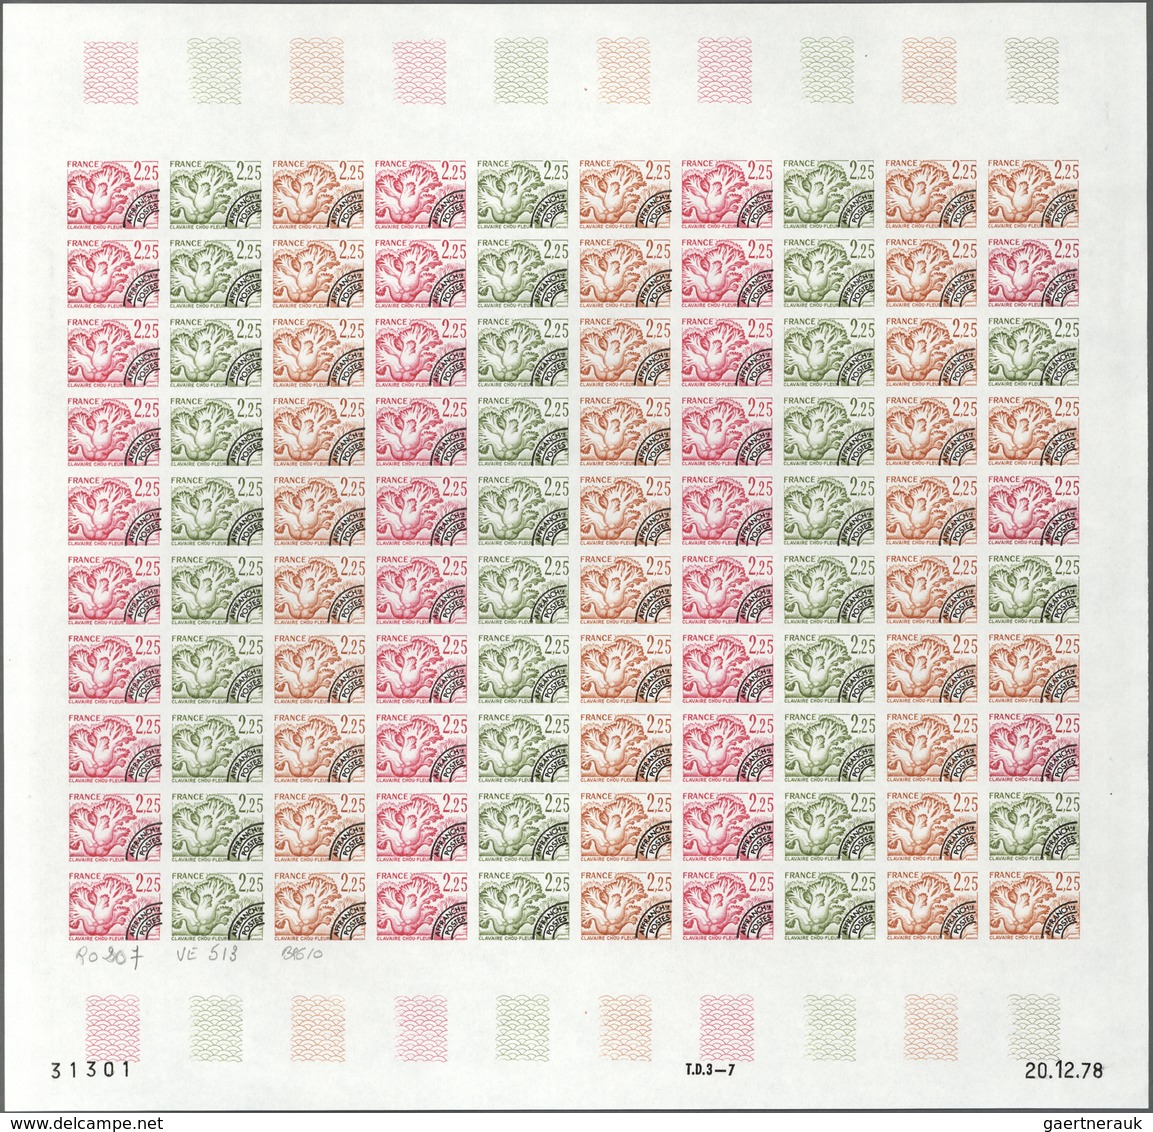 Frankreich - Vorausentwertungen: 1979, set of 4 different colour proof sheets of 100 for the issue o